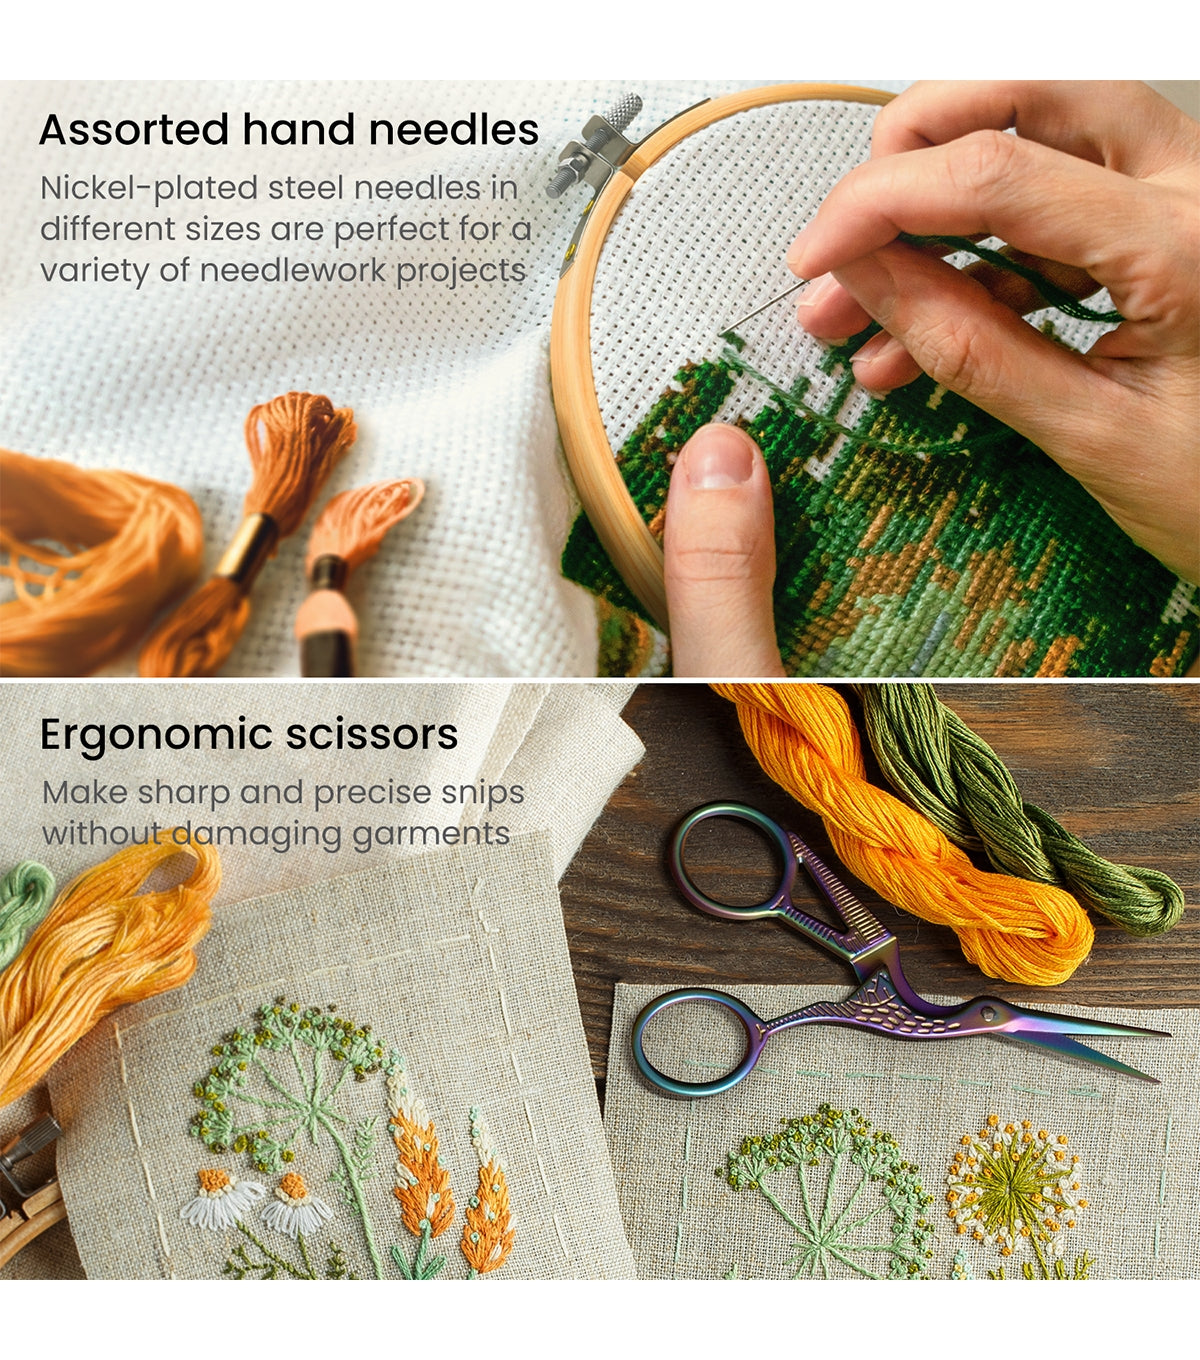  EXCEART 1 Set Set Cross Stitch Hanging Picture Embroidery Kits  pro Tools Hand Embroidery kit Embroidery Accessories Embroidery Tools  Embroidery Accessory Manual Embroidery Thread Polyester